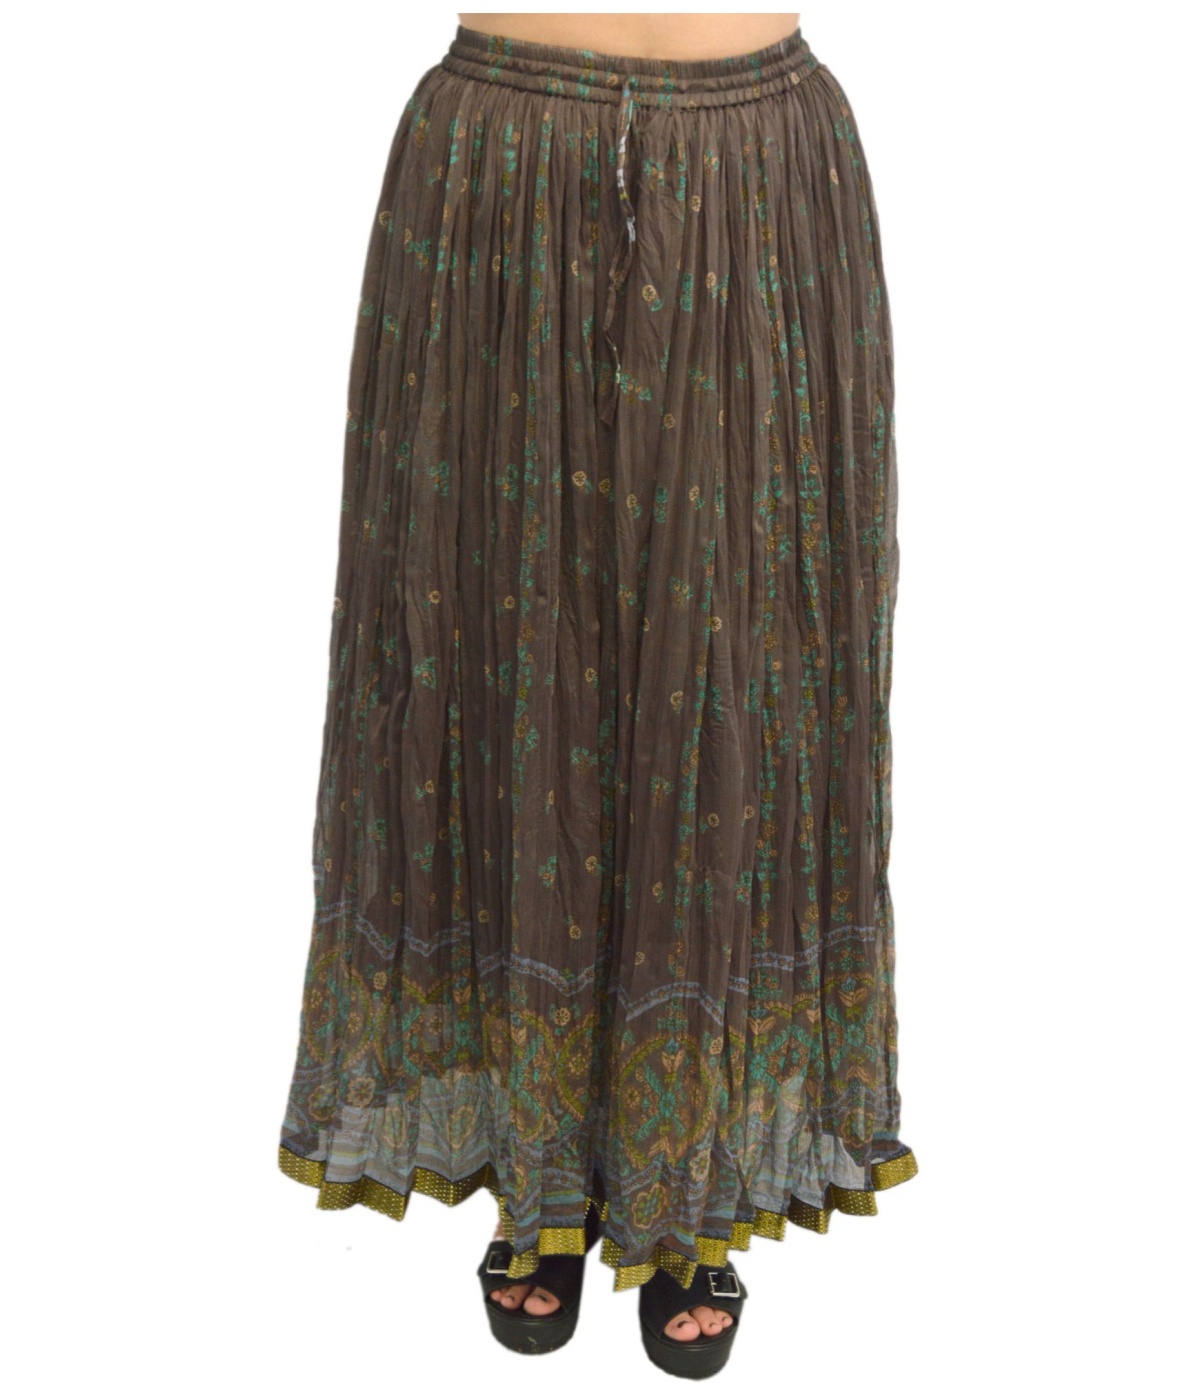  Coffee Brown Floral Chiffon Indian Skirt